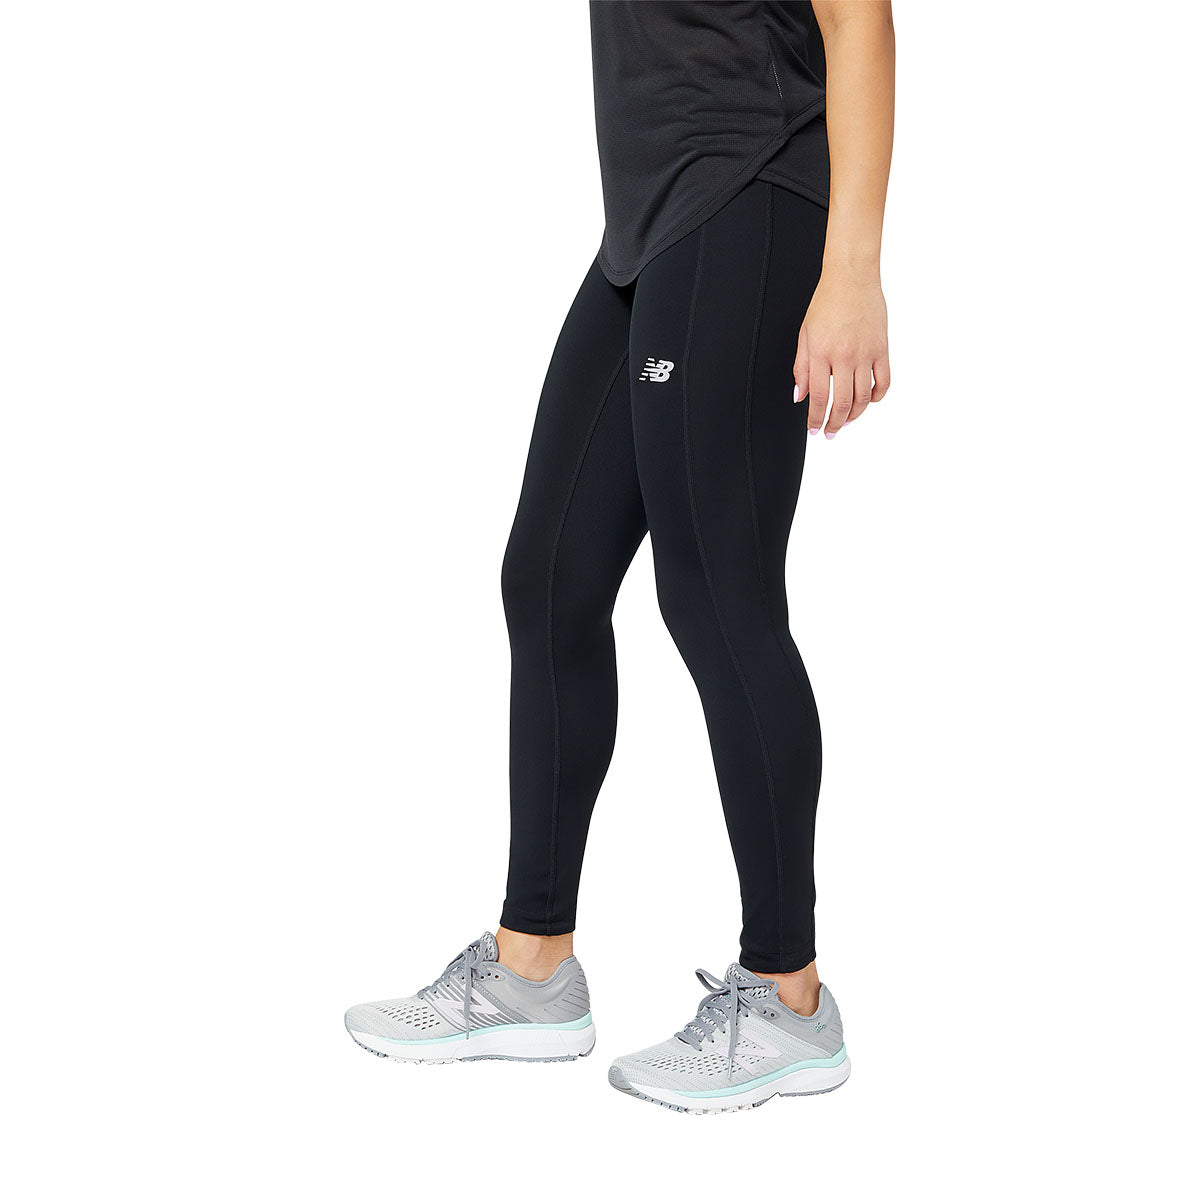 New Balance Accelerate Running Tights